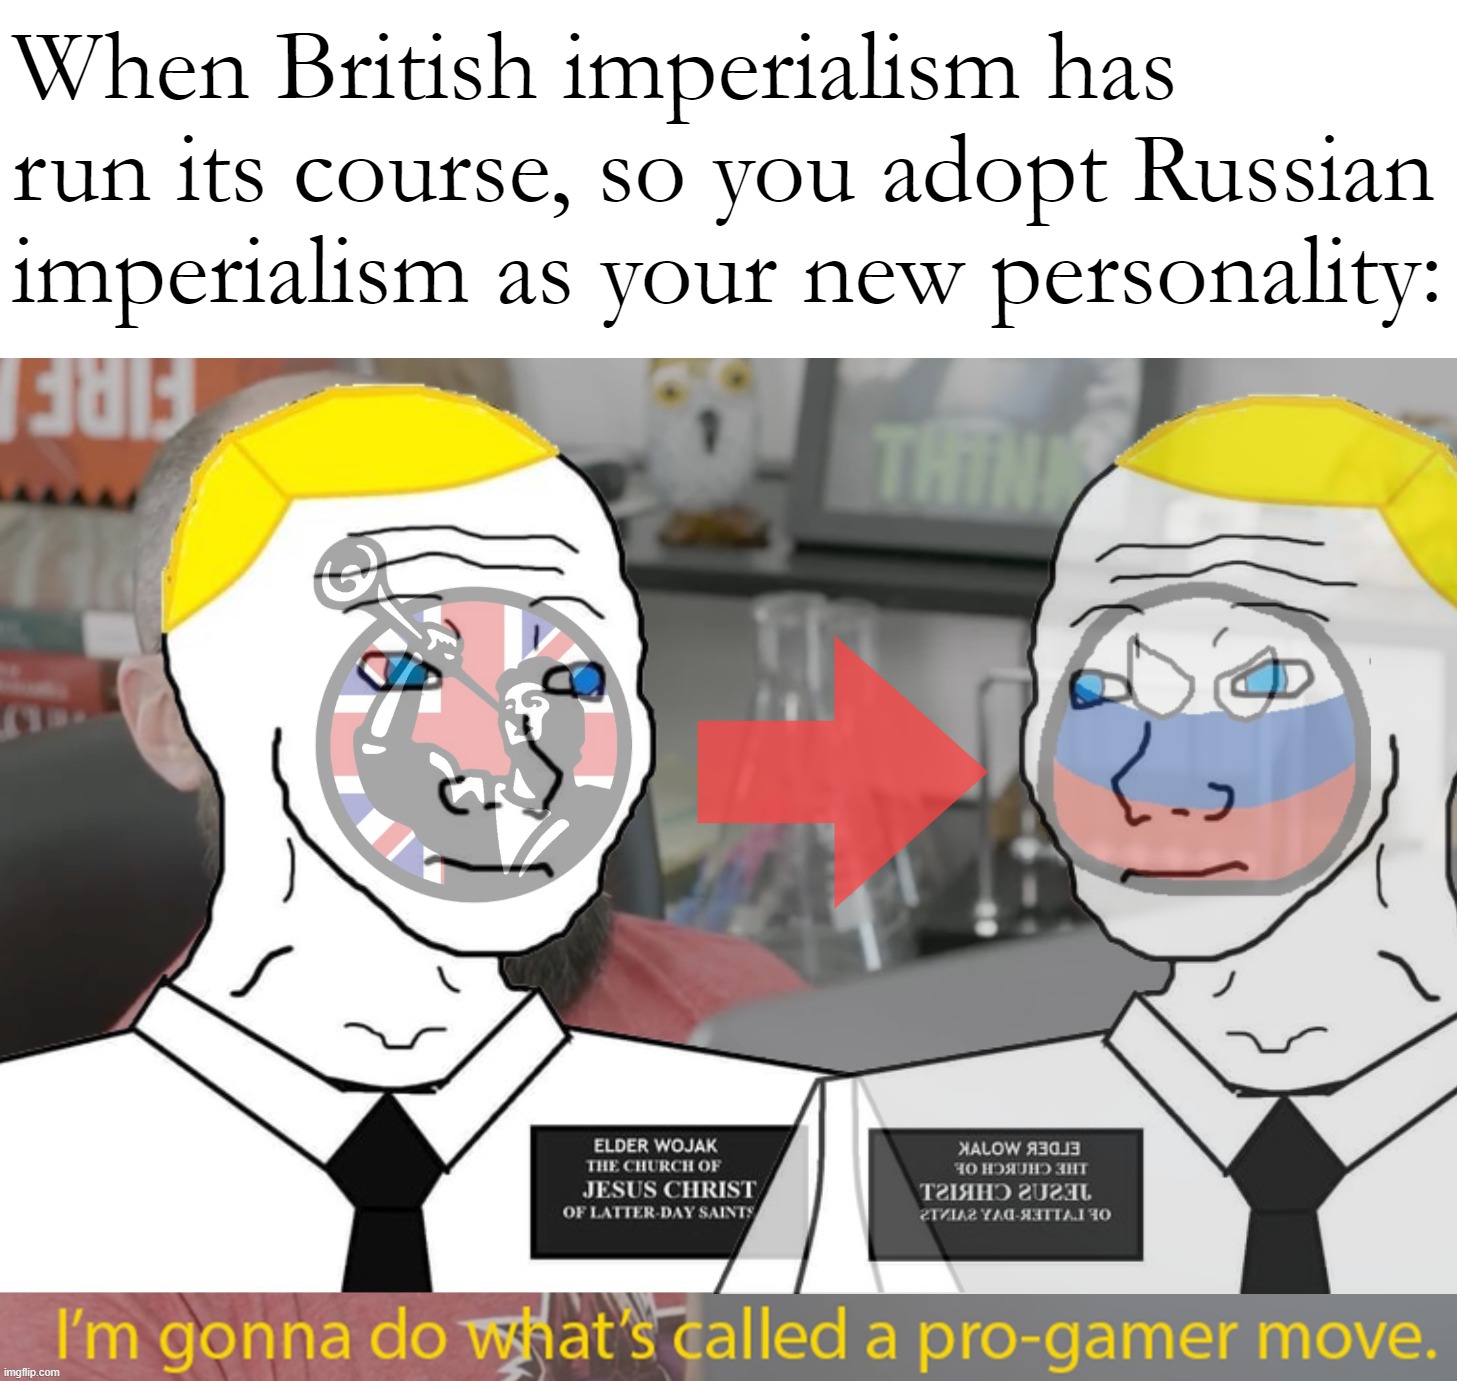 Coping strategy: Identifying as the current thing | When British imperialism has run its course, so you adopt Russian imperialism as your new personality: | image tagged in britishmormon does a pro-gamer move,british imperialism,russian imperialism,whoever has the most manly men,coping,strategy | made w/ Imgflip meme maker